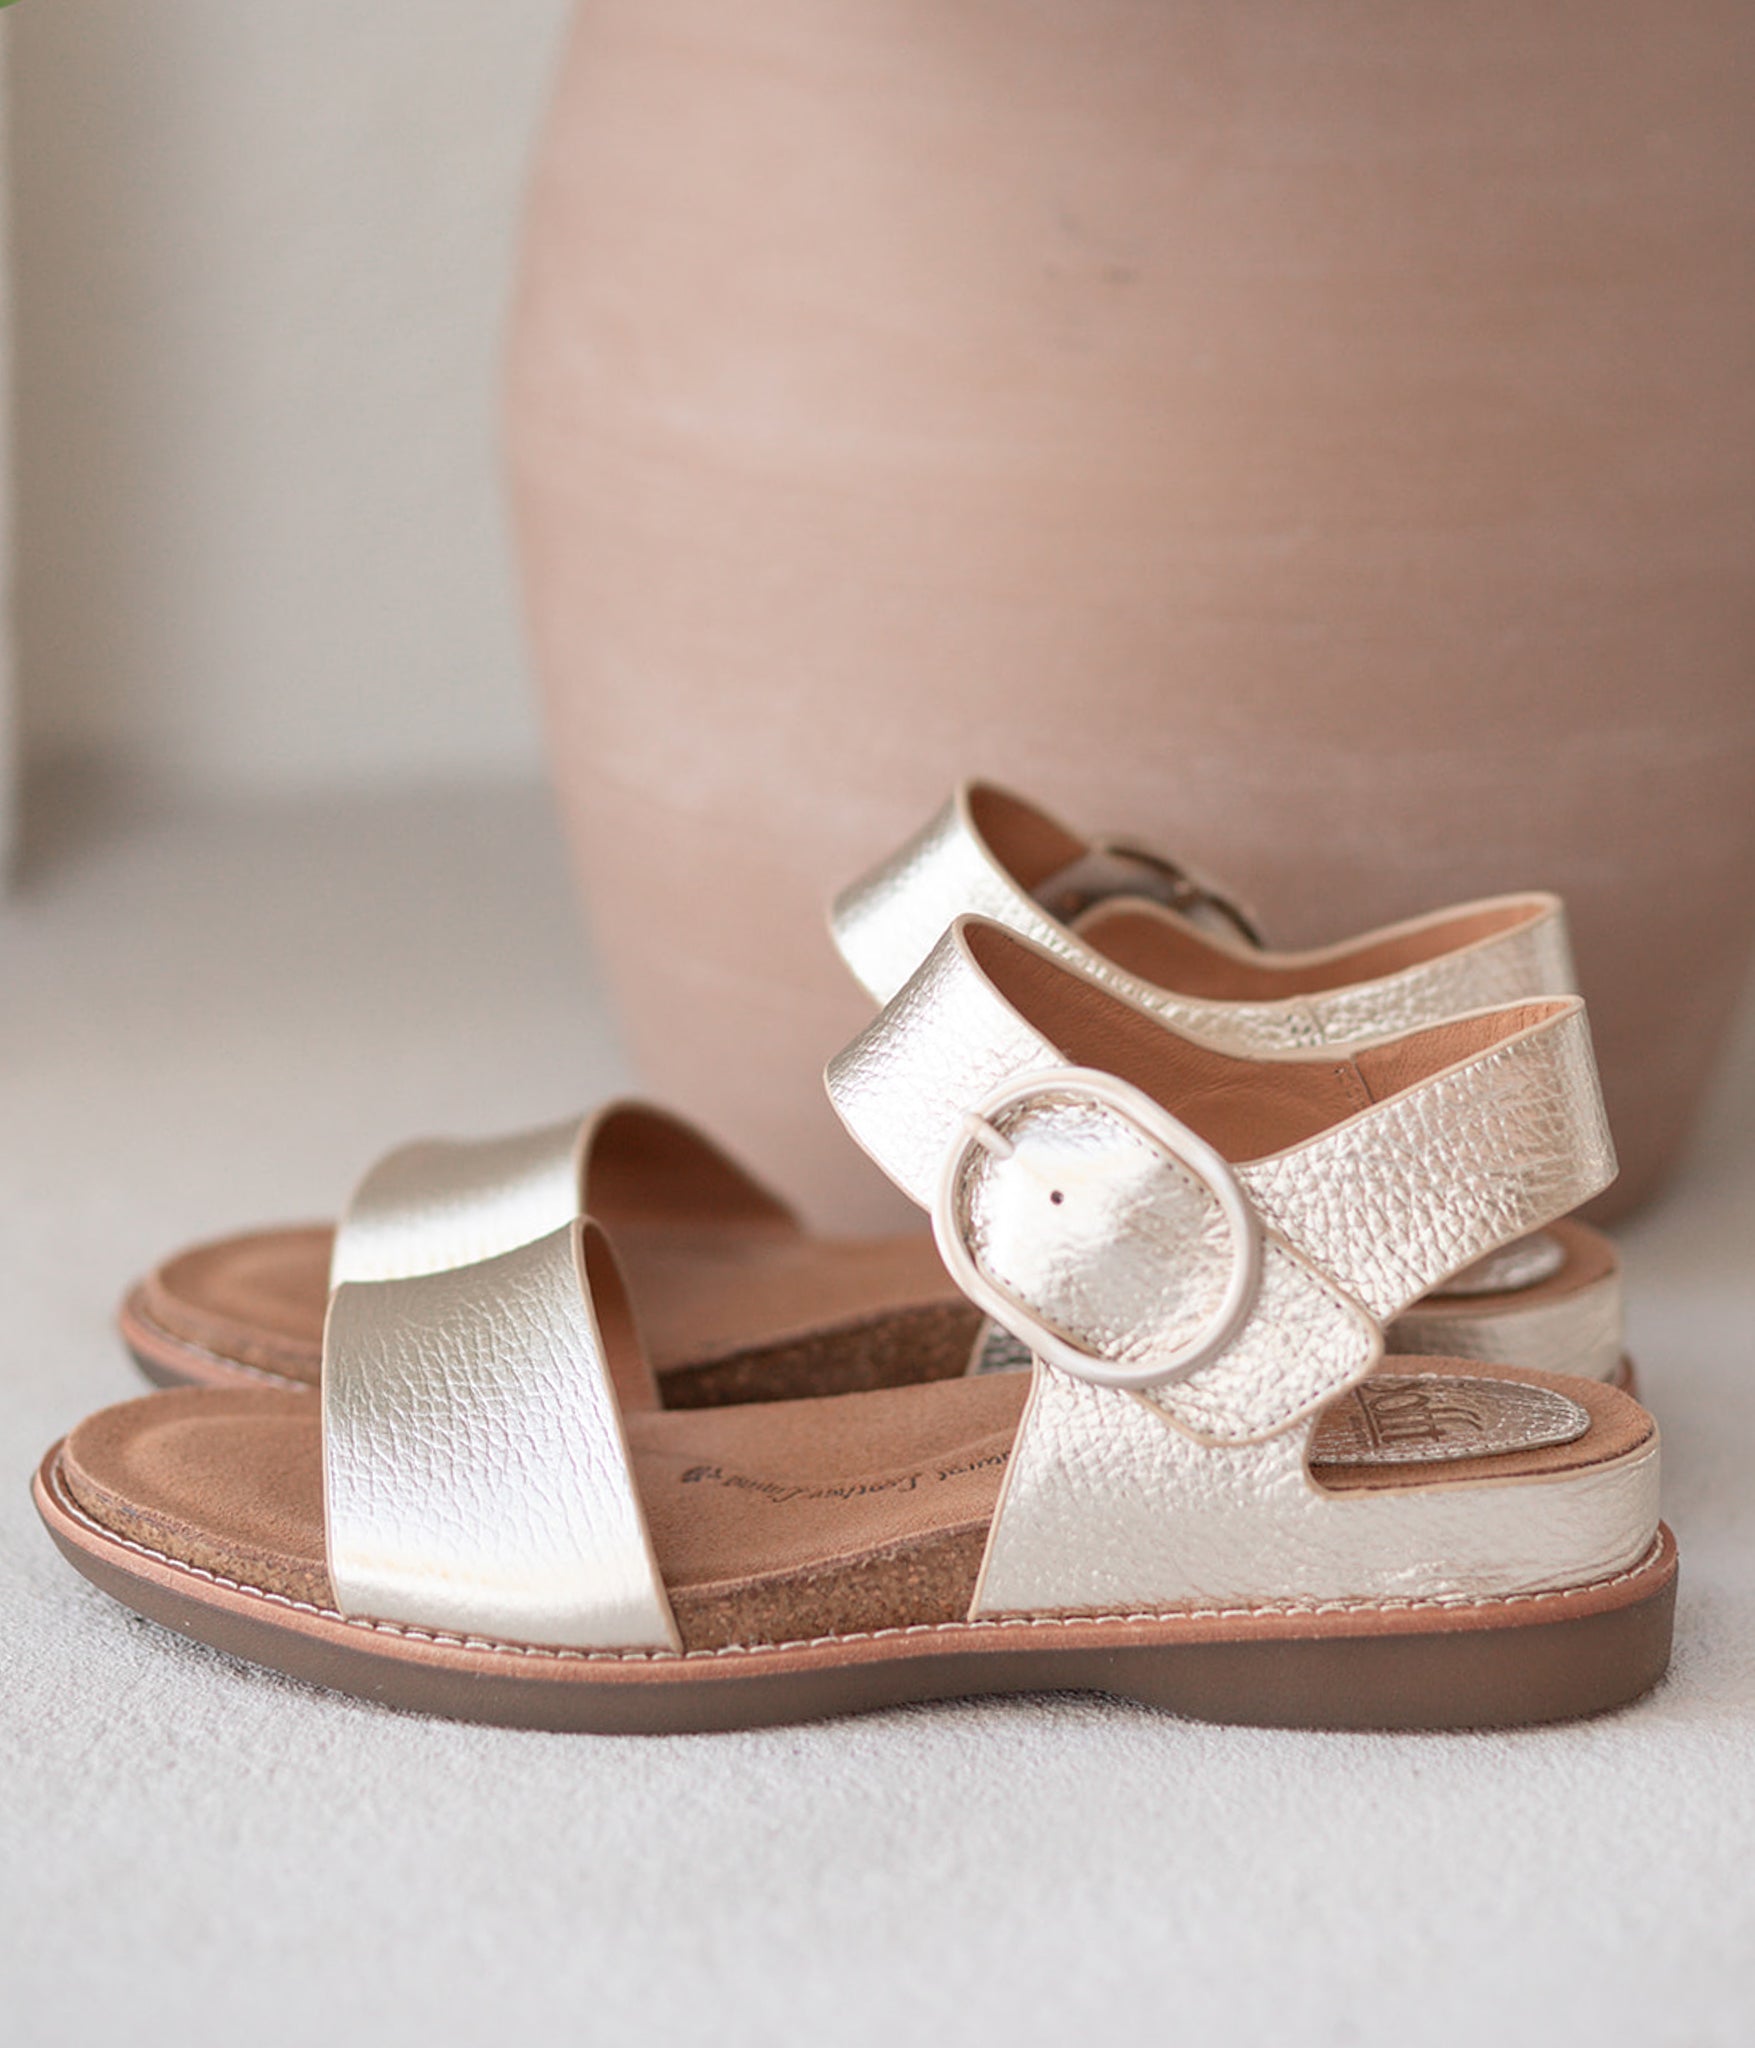 Bali Leather Sandals in Platino Gold by Sofft Shoes